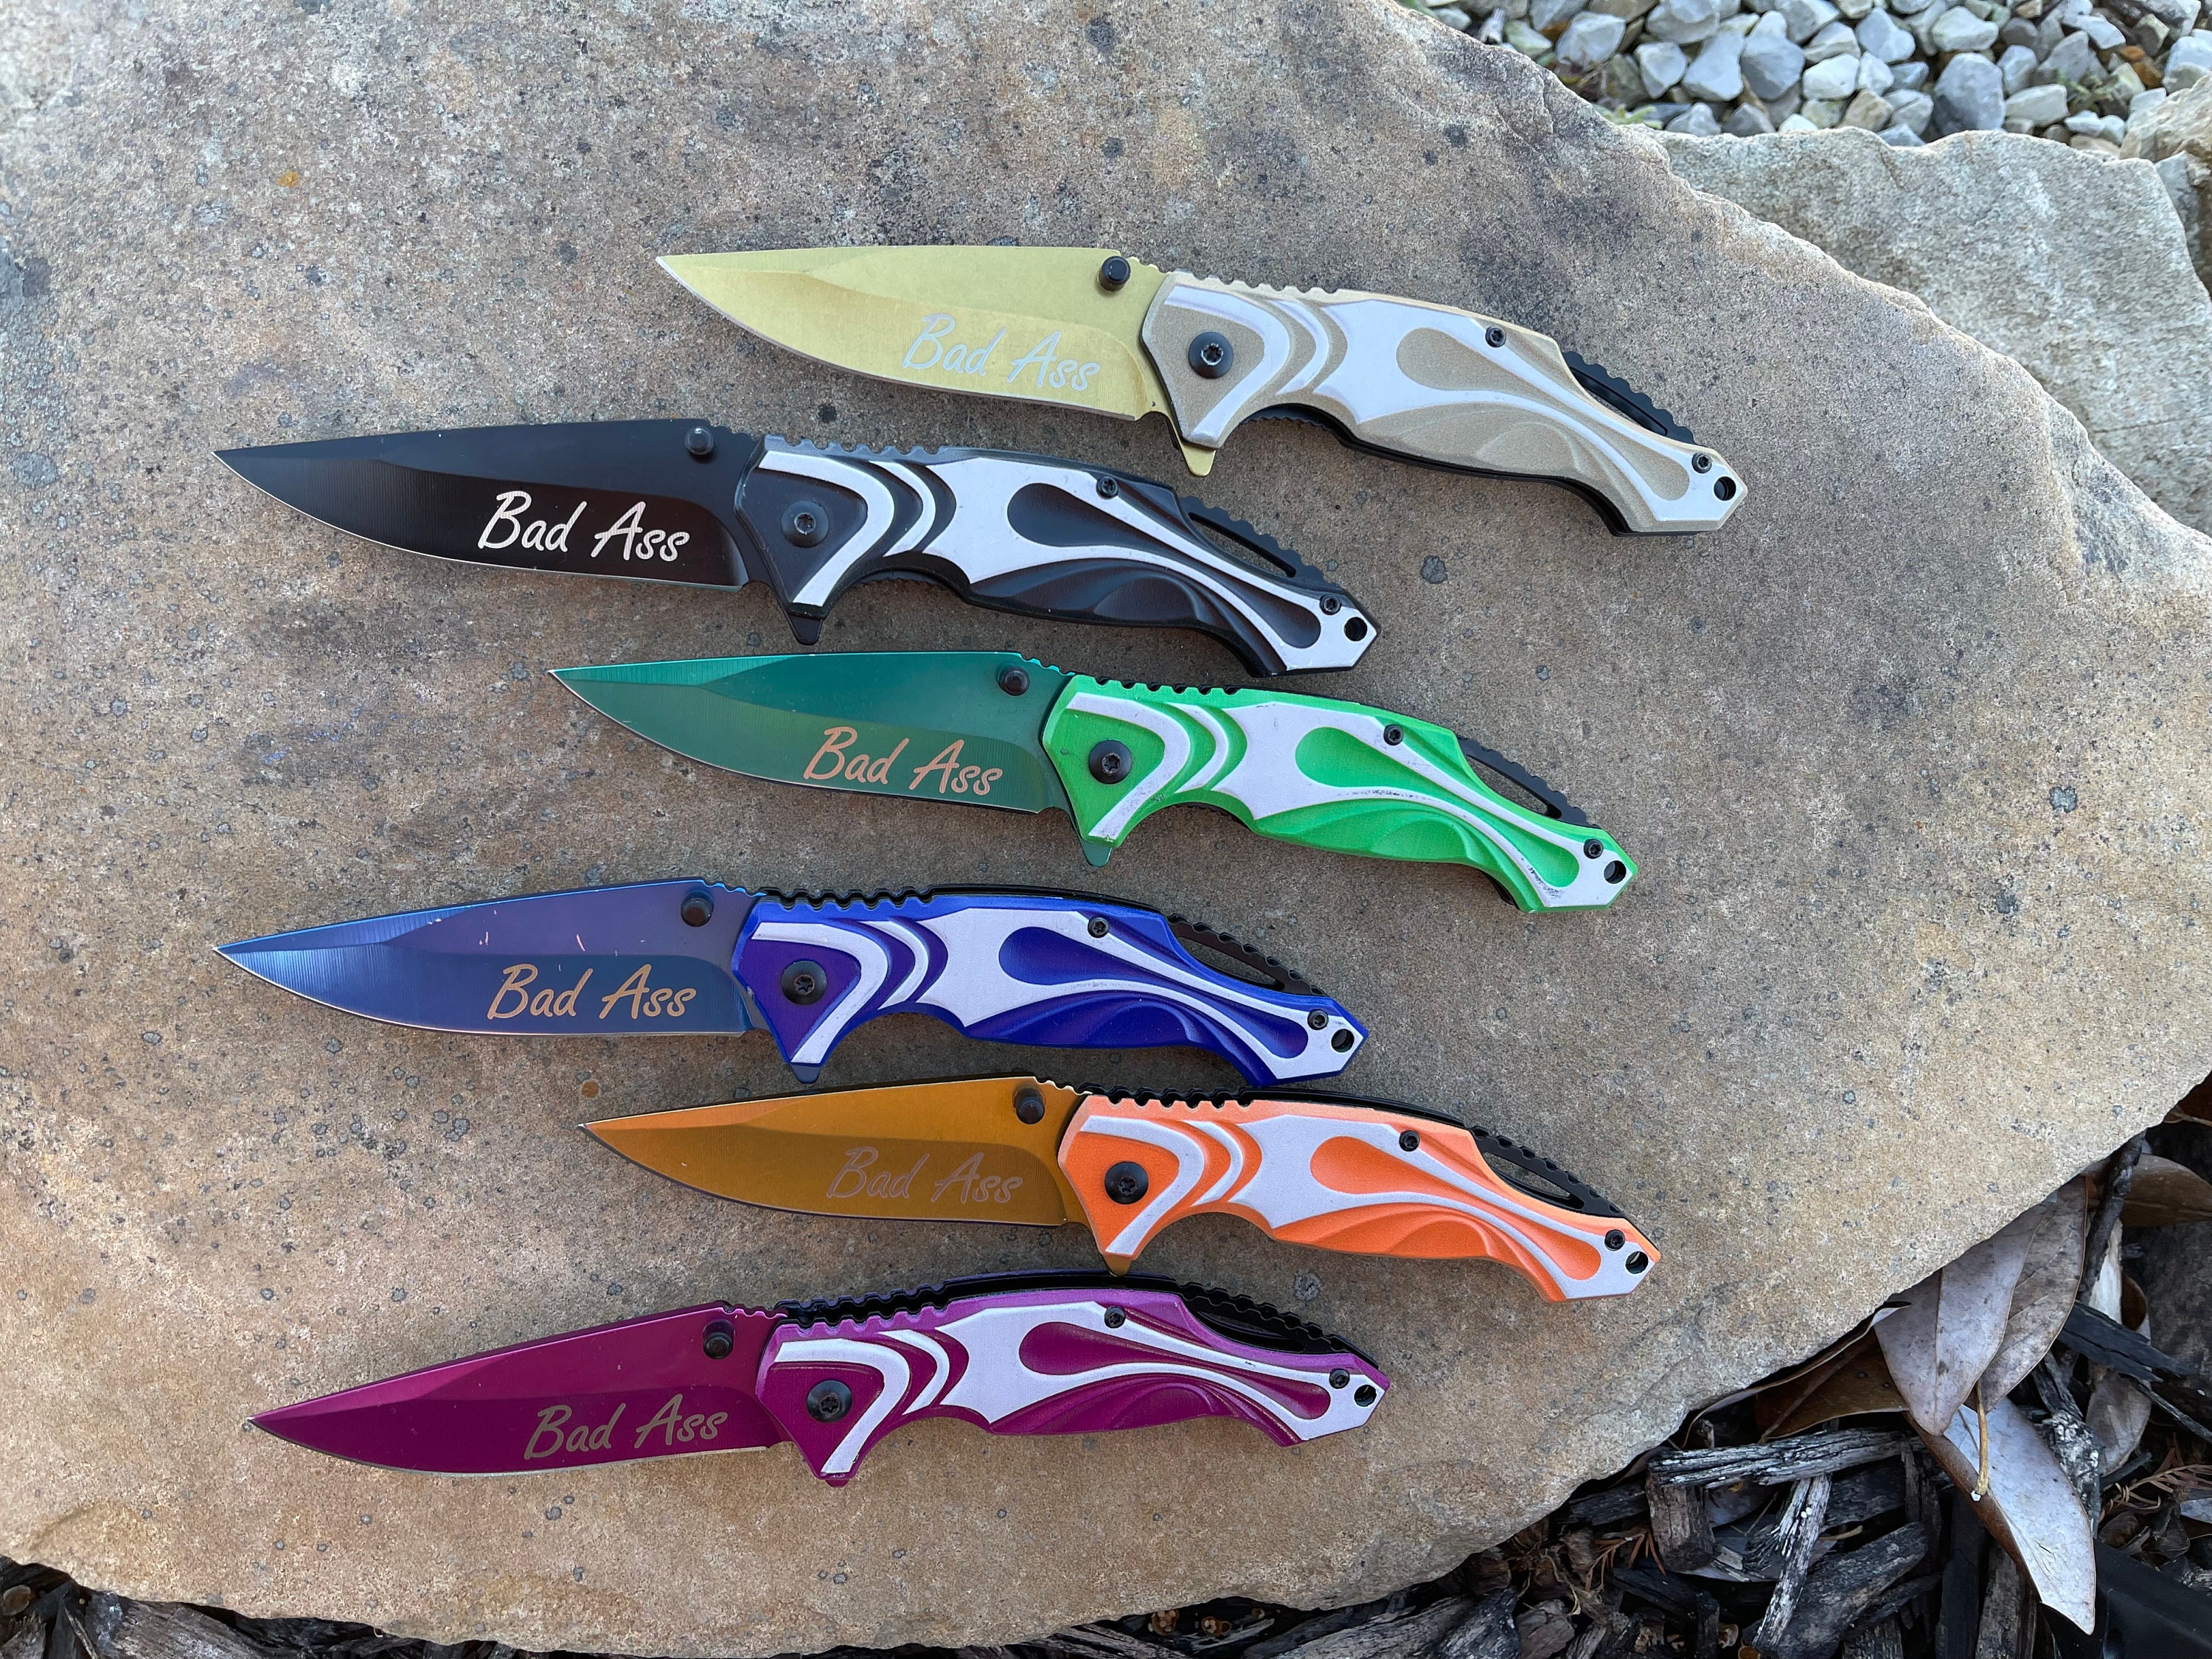 Guys Ladies Rainbow Multi Color All Metal Spring Assisted Pocket Knife 4.2  oz.